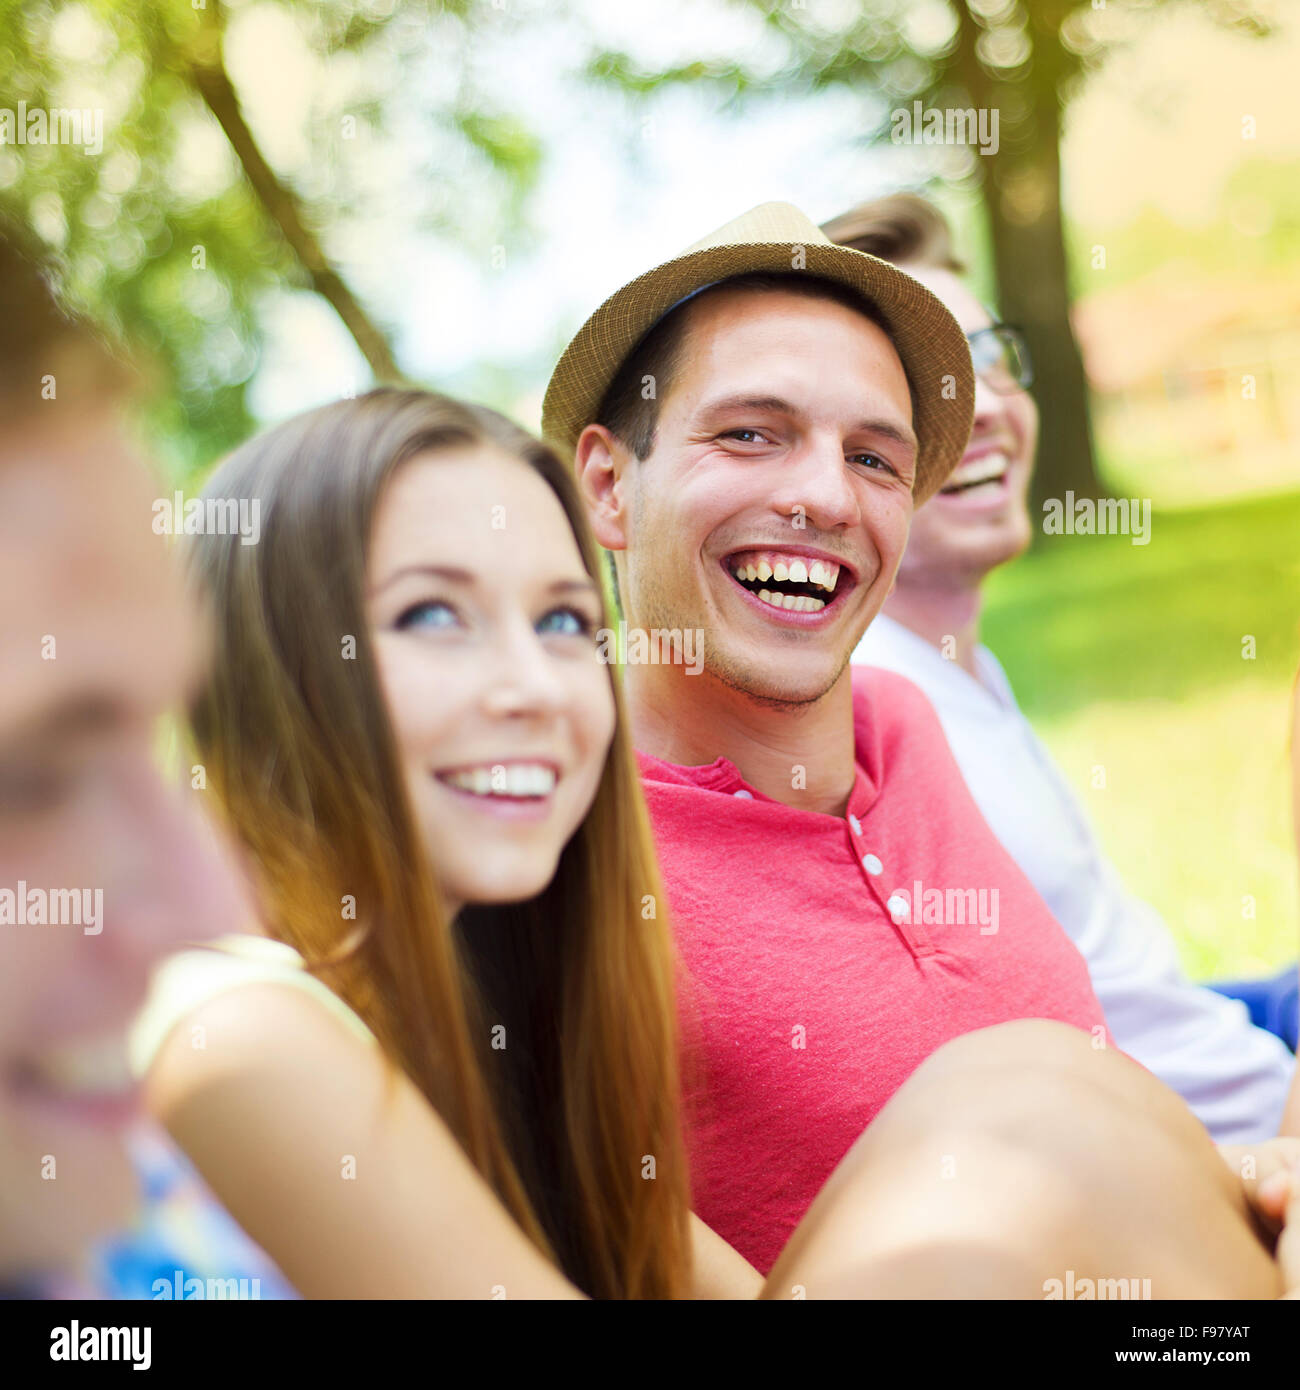 Group of young people having fun in park, sitting on the grass Stock Photo